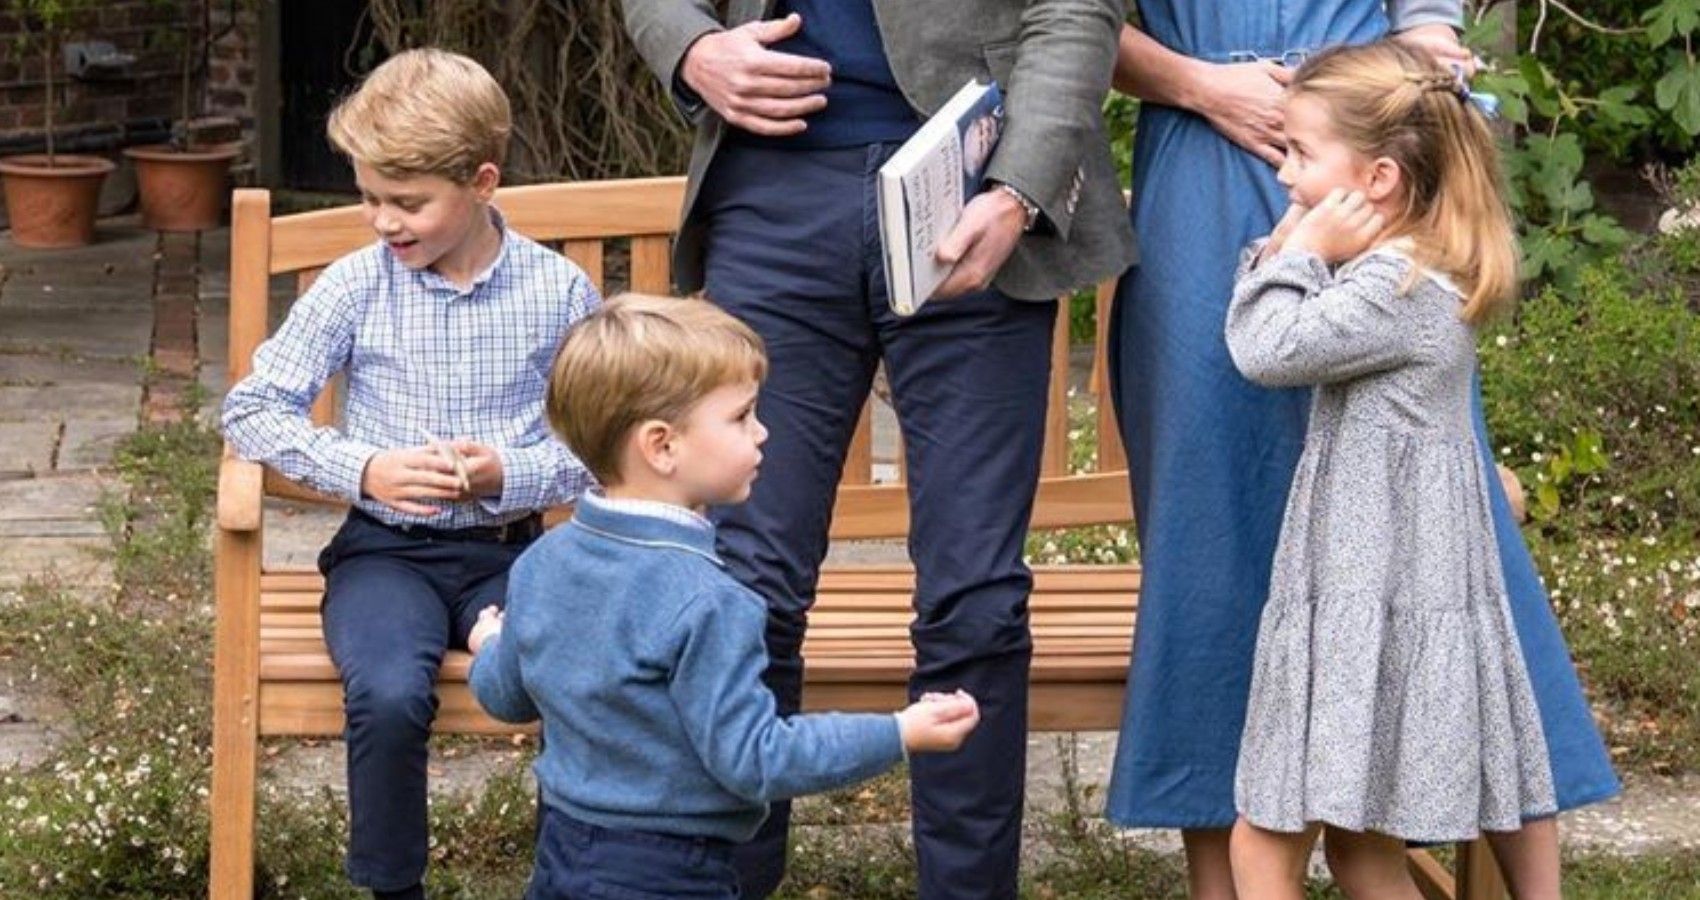 The royal children looking at someone